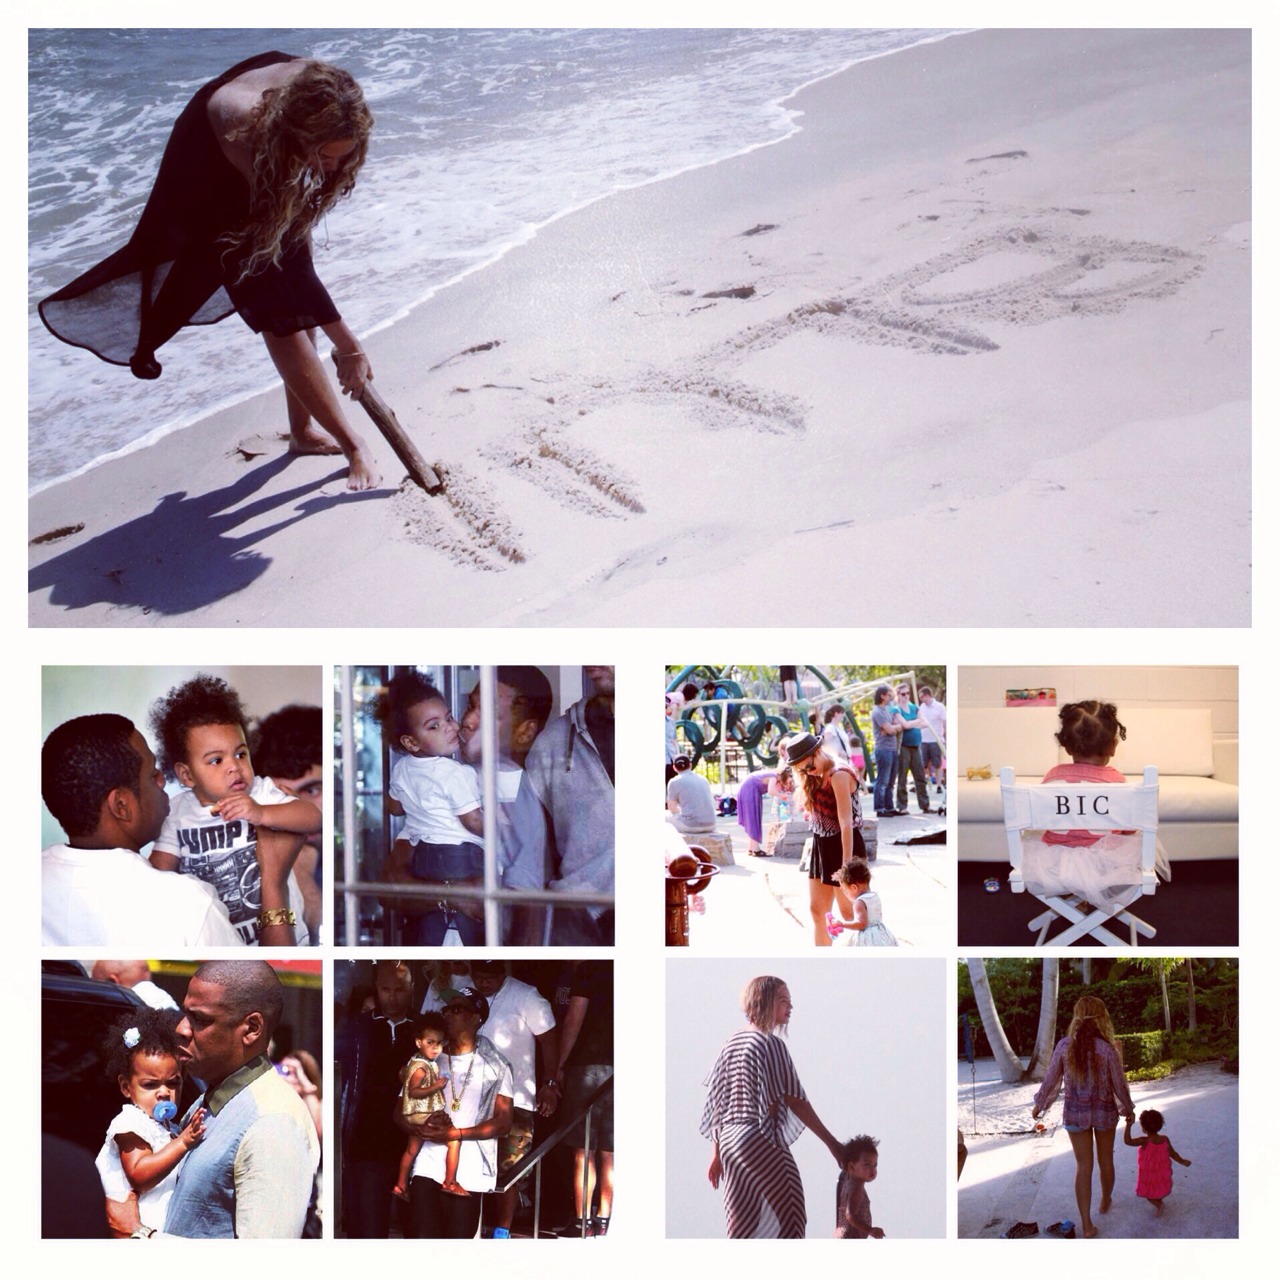 Beyoncé Commemorates Blue Ivy's 2nd Birthday with Fan Tumblr Blog